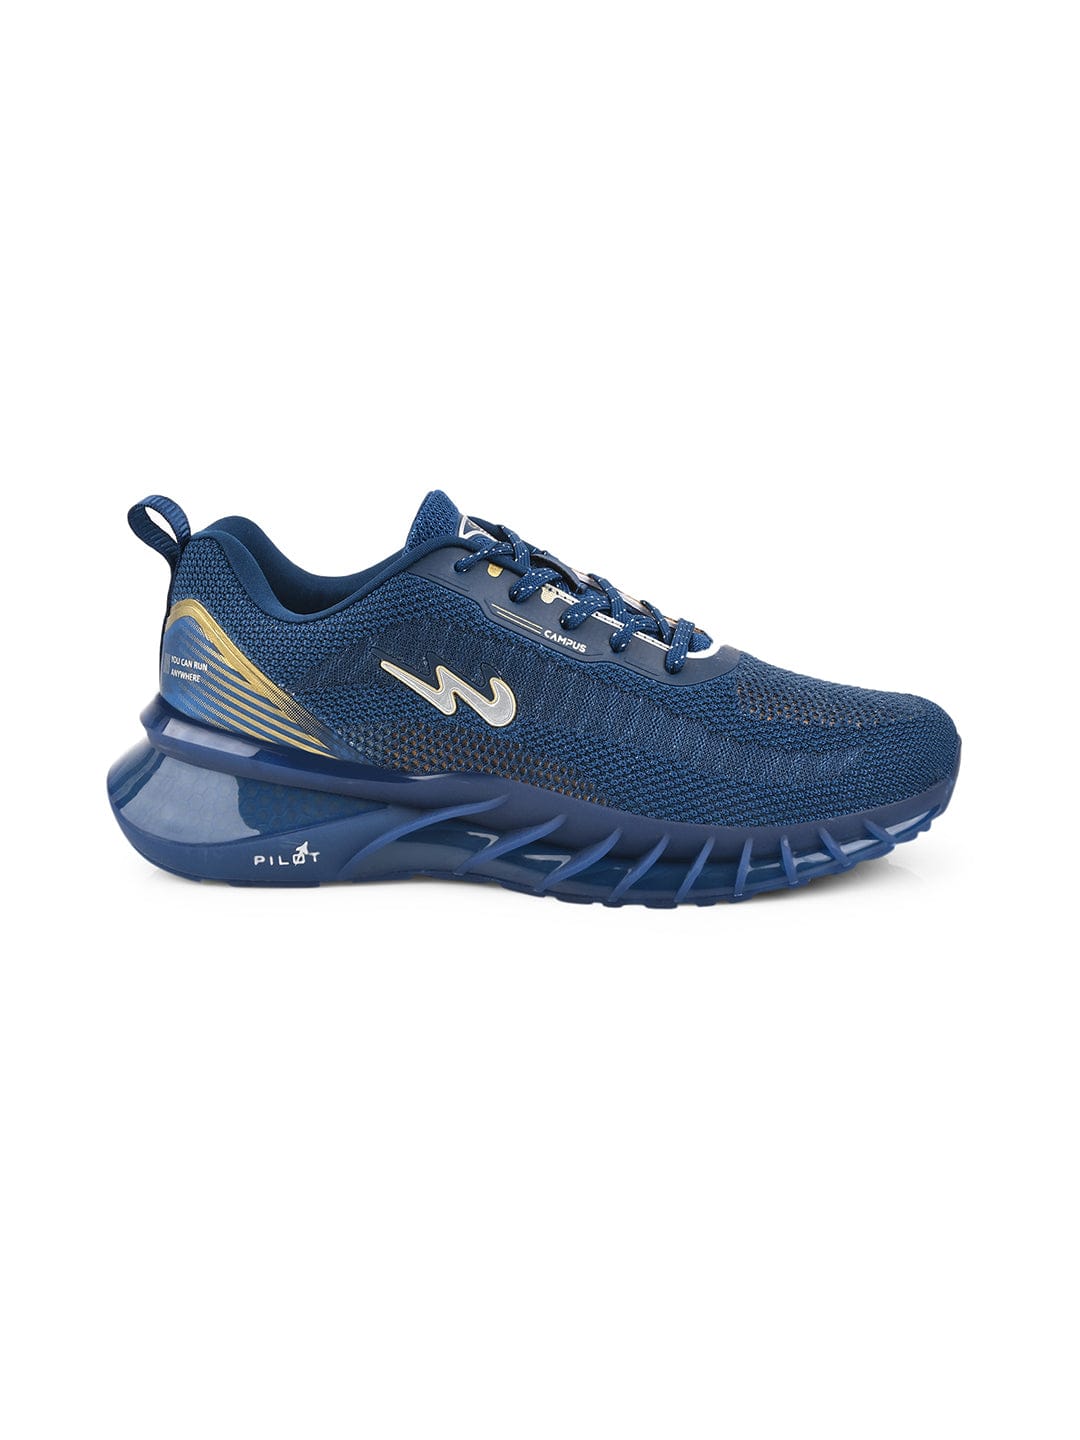 Buy TERMINATOR N Blue Mens Running Shoes online  Campus Shoes